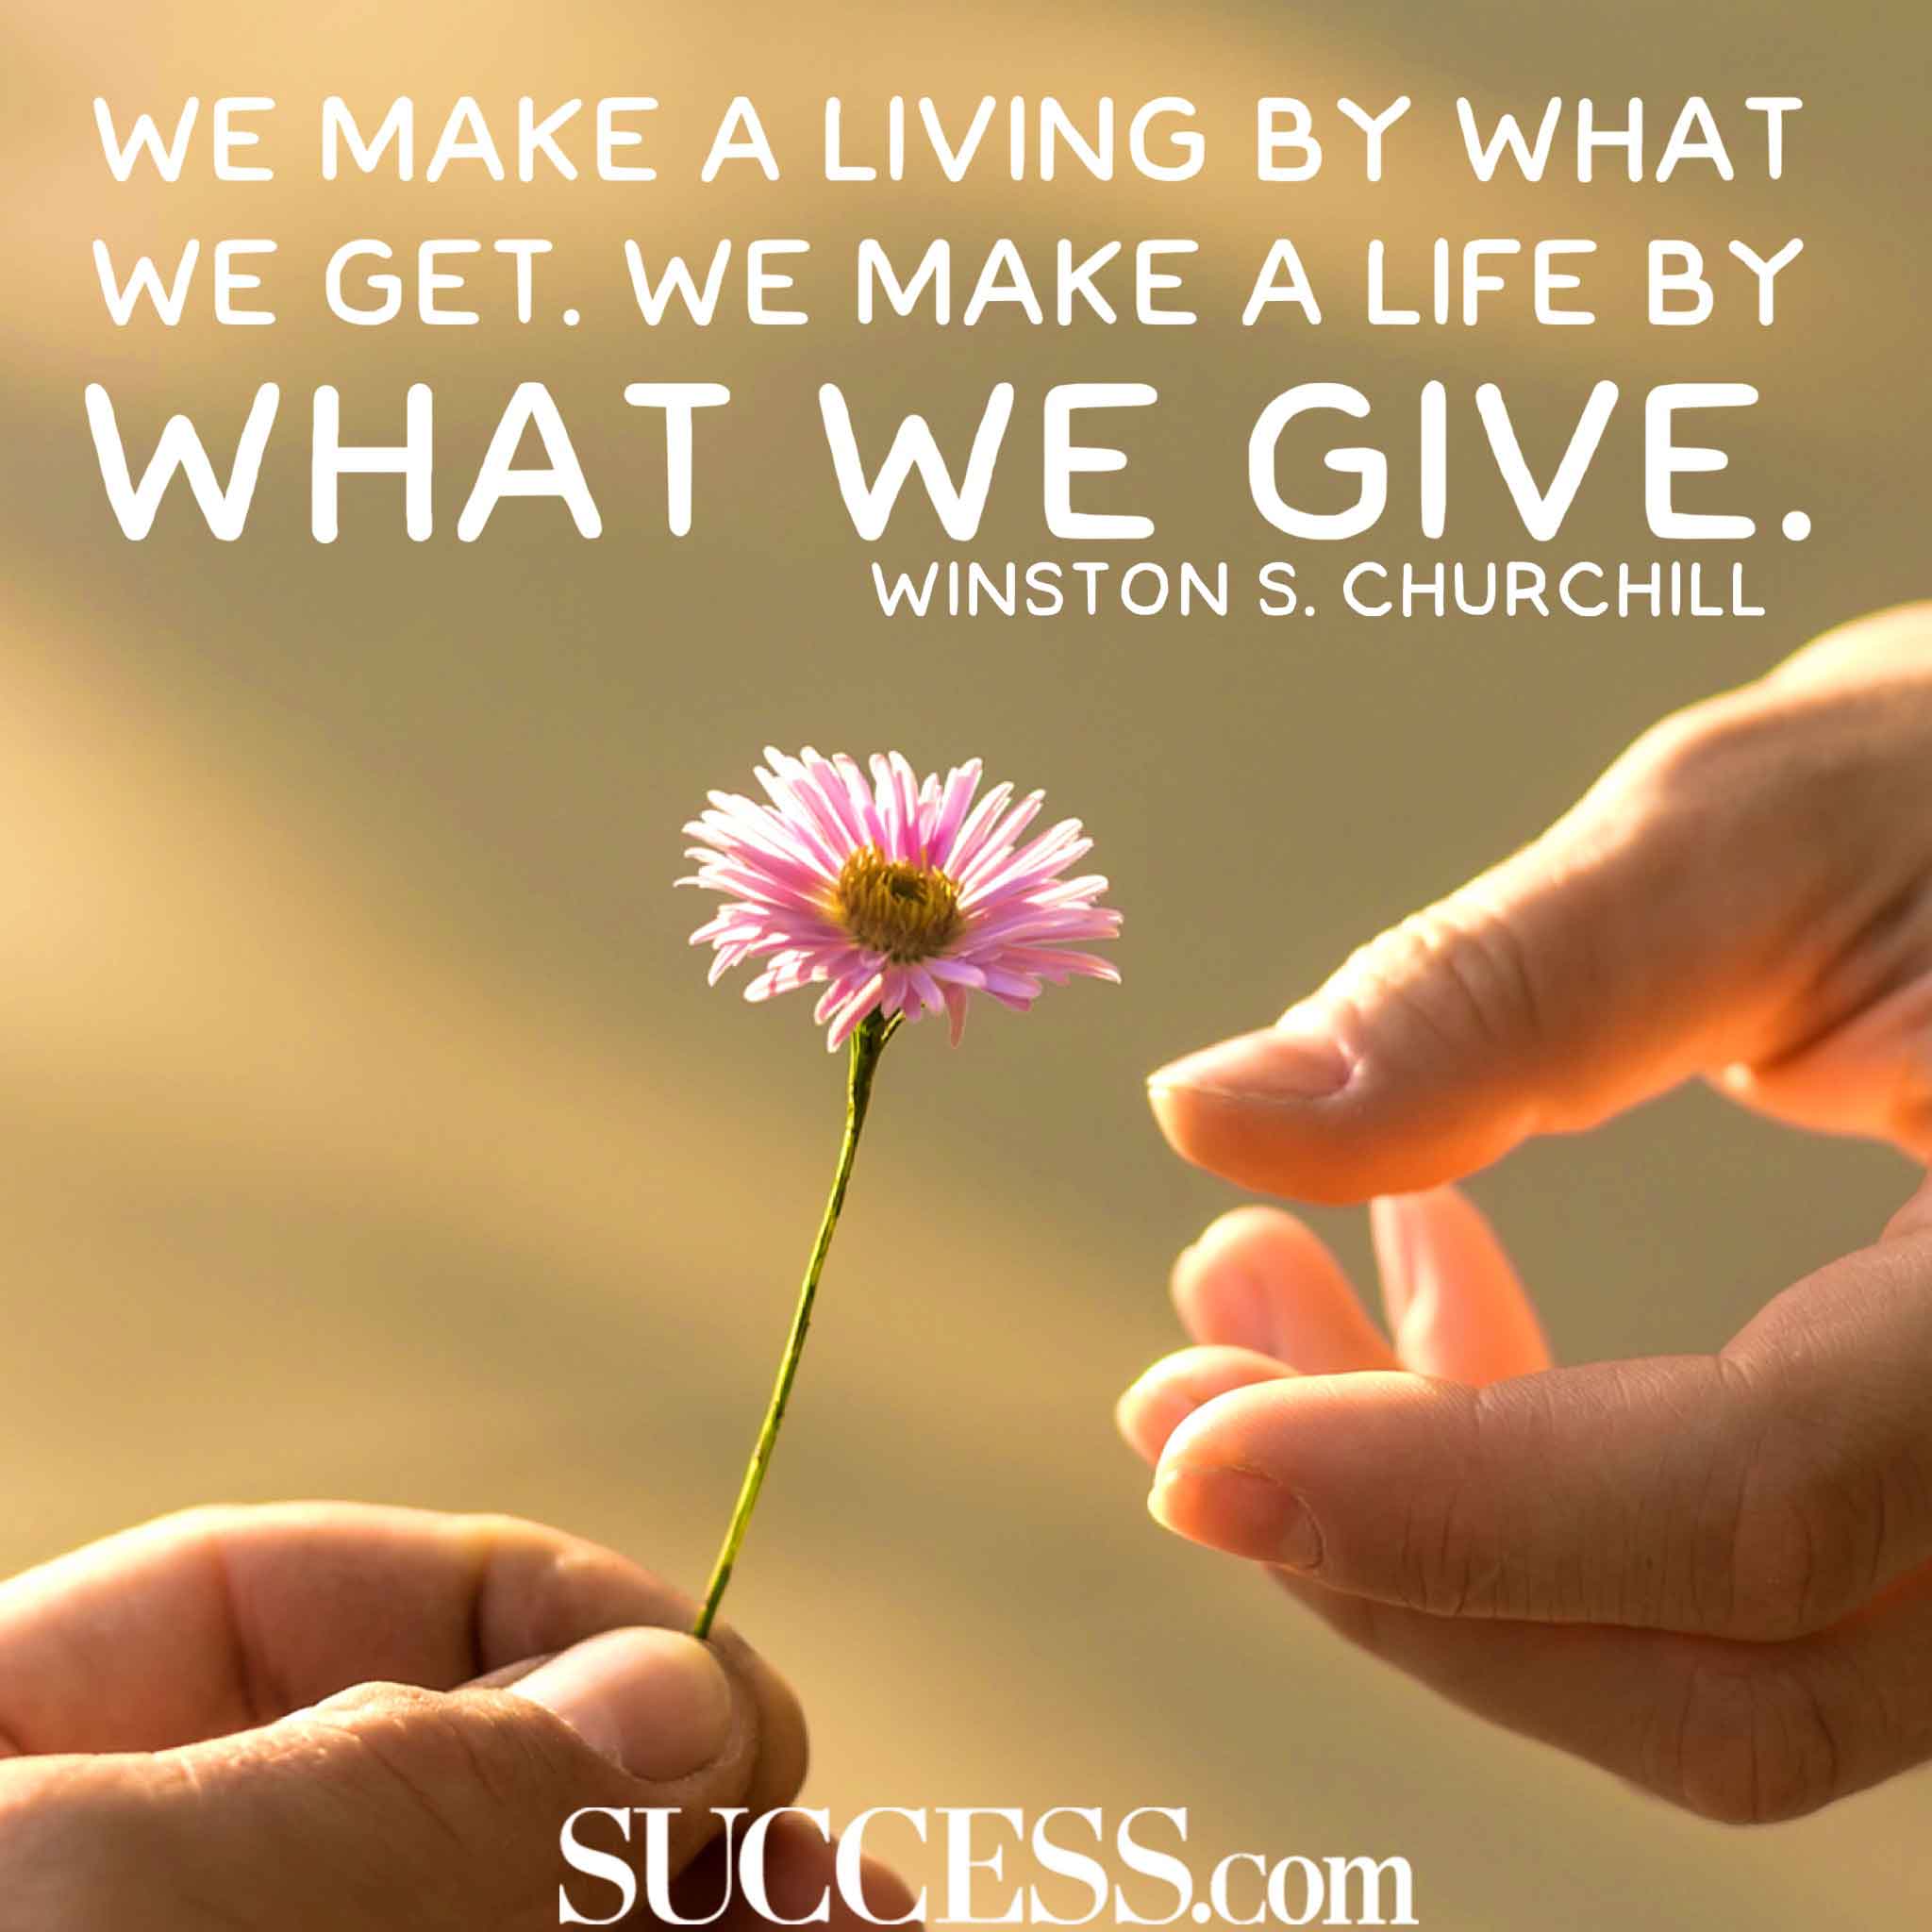 15 Inspiring Quotes About Giving | SUCCESS